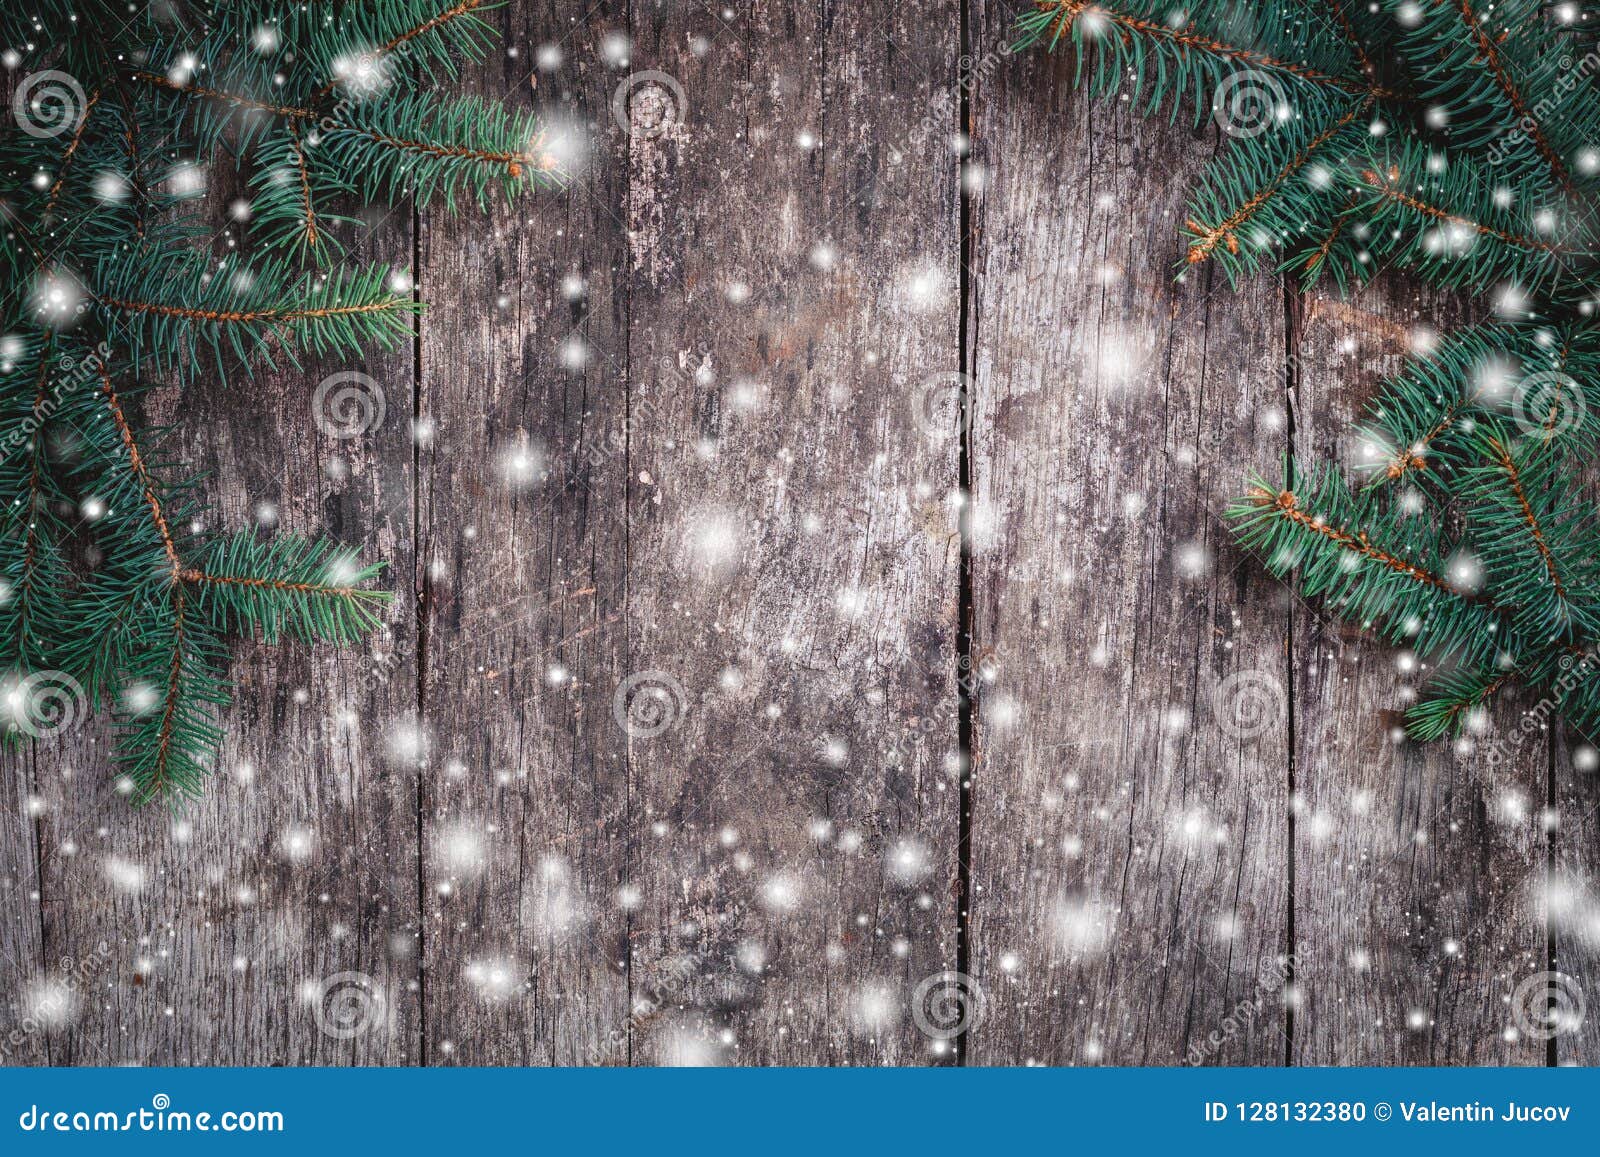 christmas fir branches on wooden background. xmas and happy new year composition.